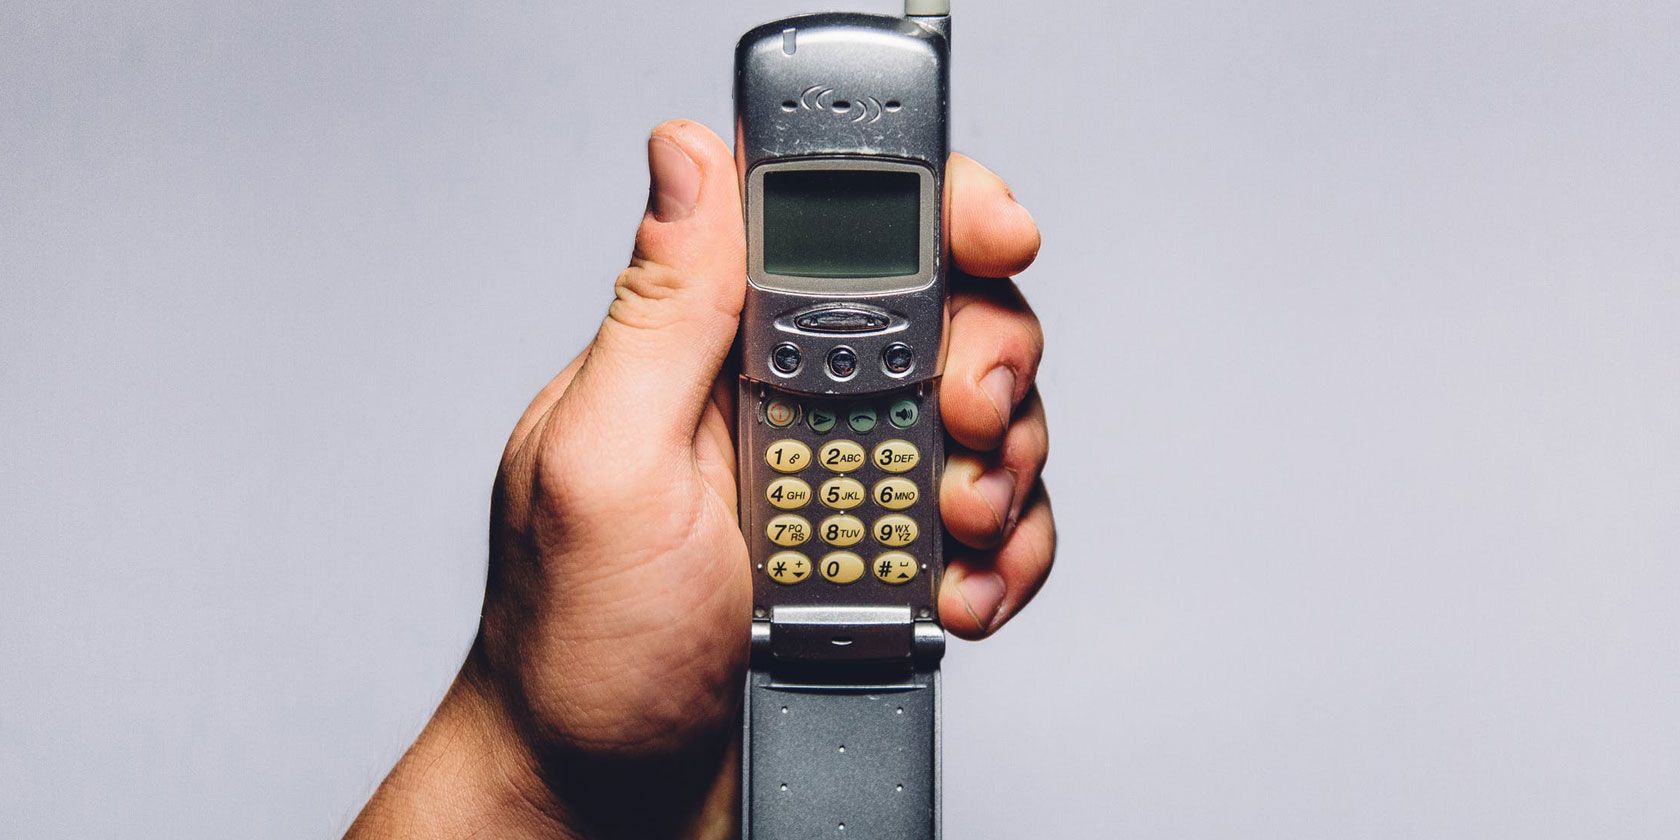 I Used a Dumbphone for a Year: Here Are 8 Lessons I've Learned